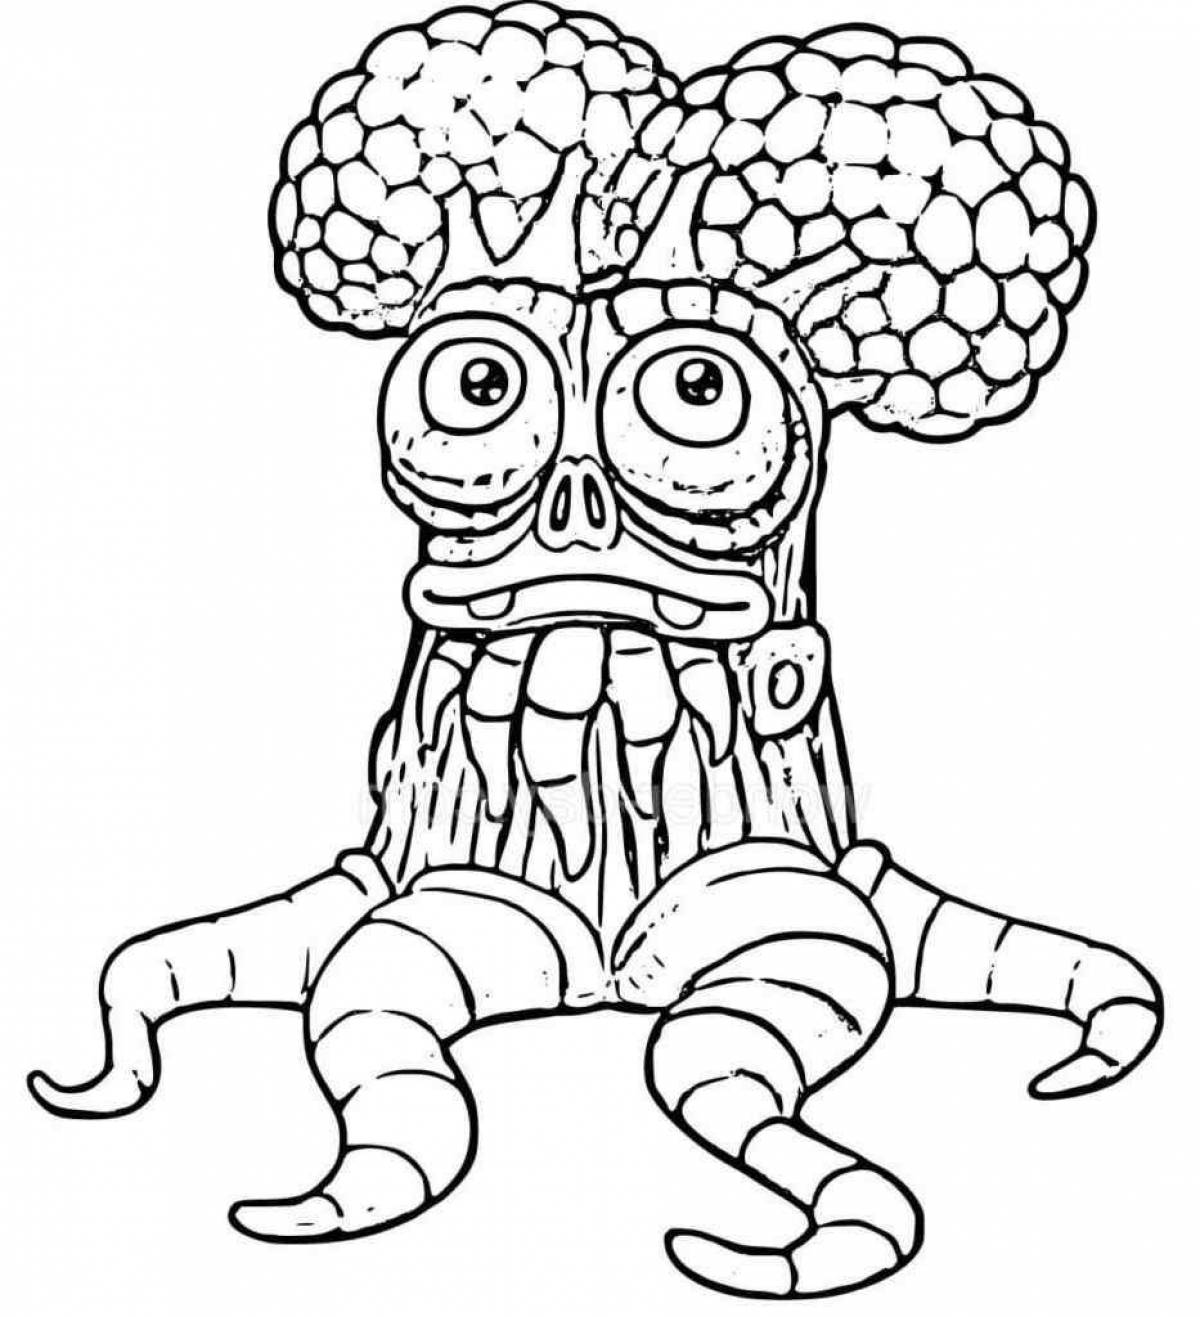 Disgusting monsters coloring pages from the door